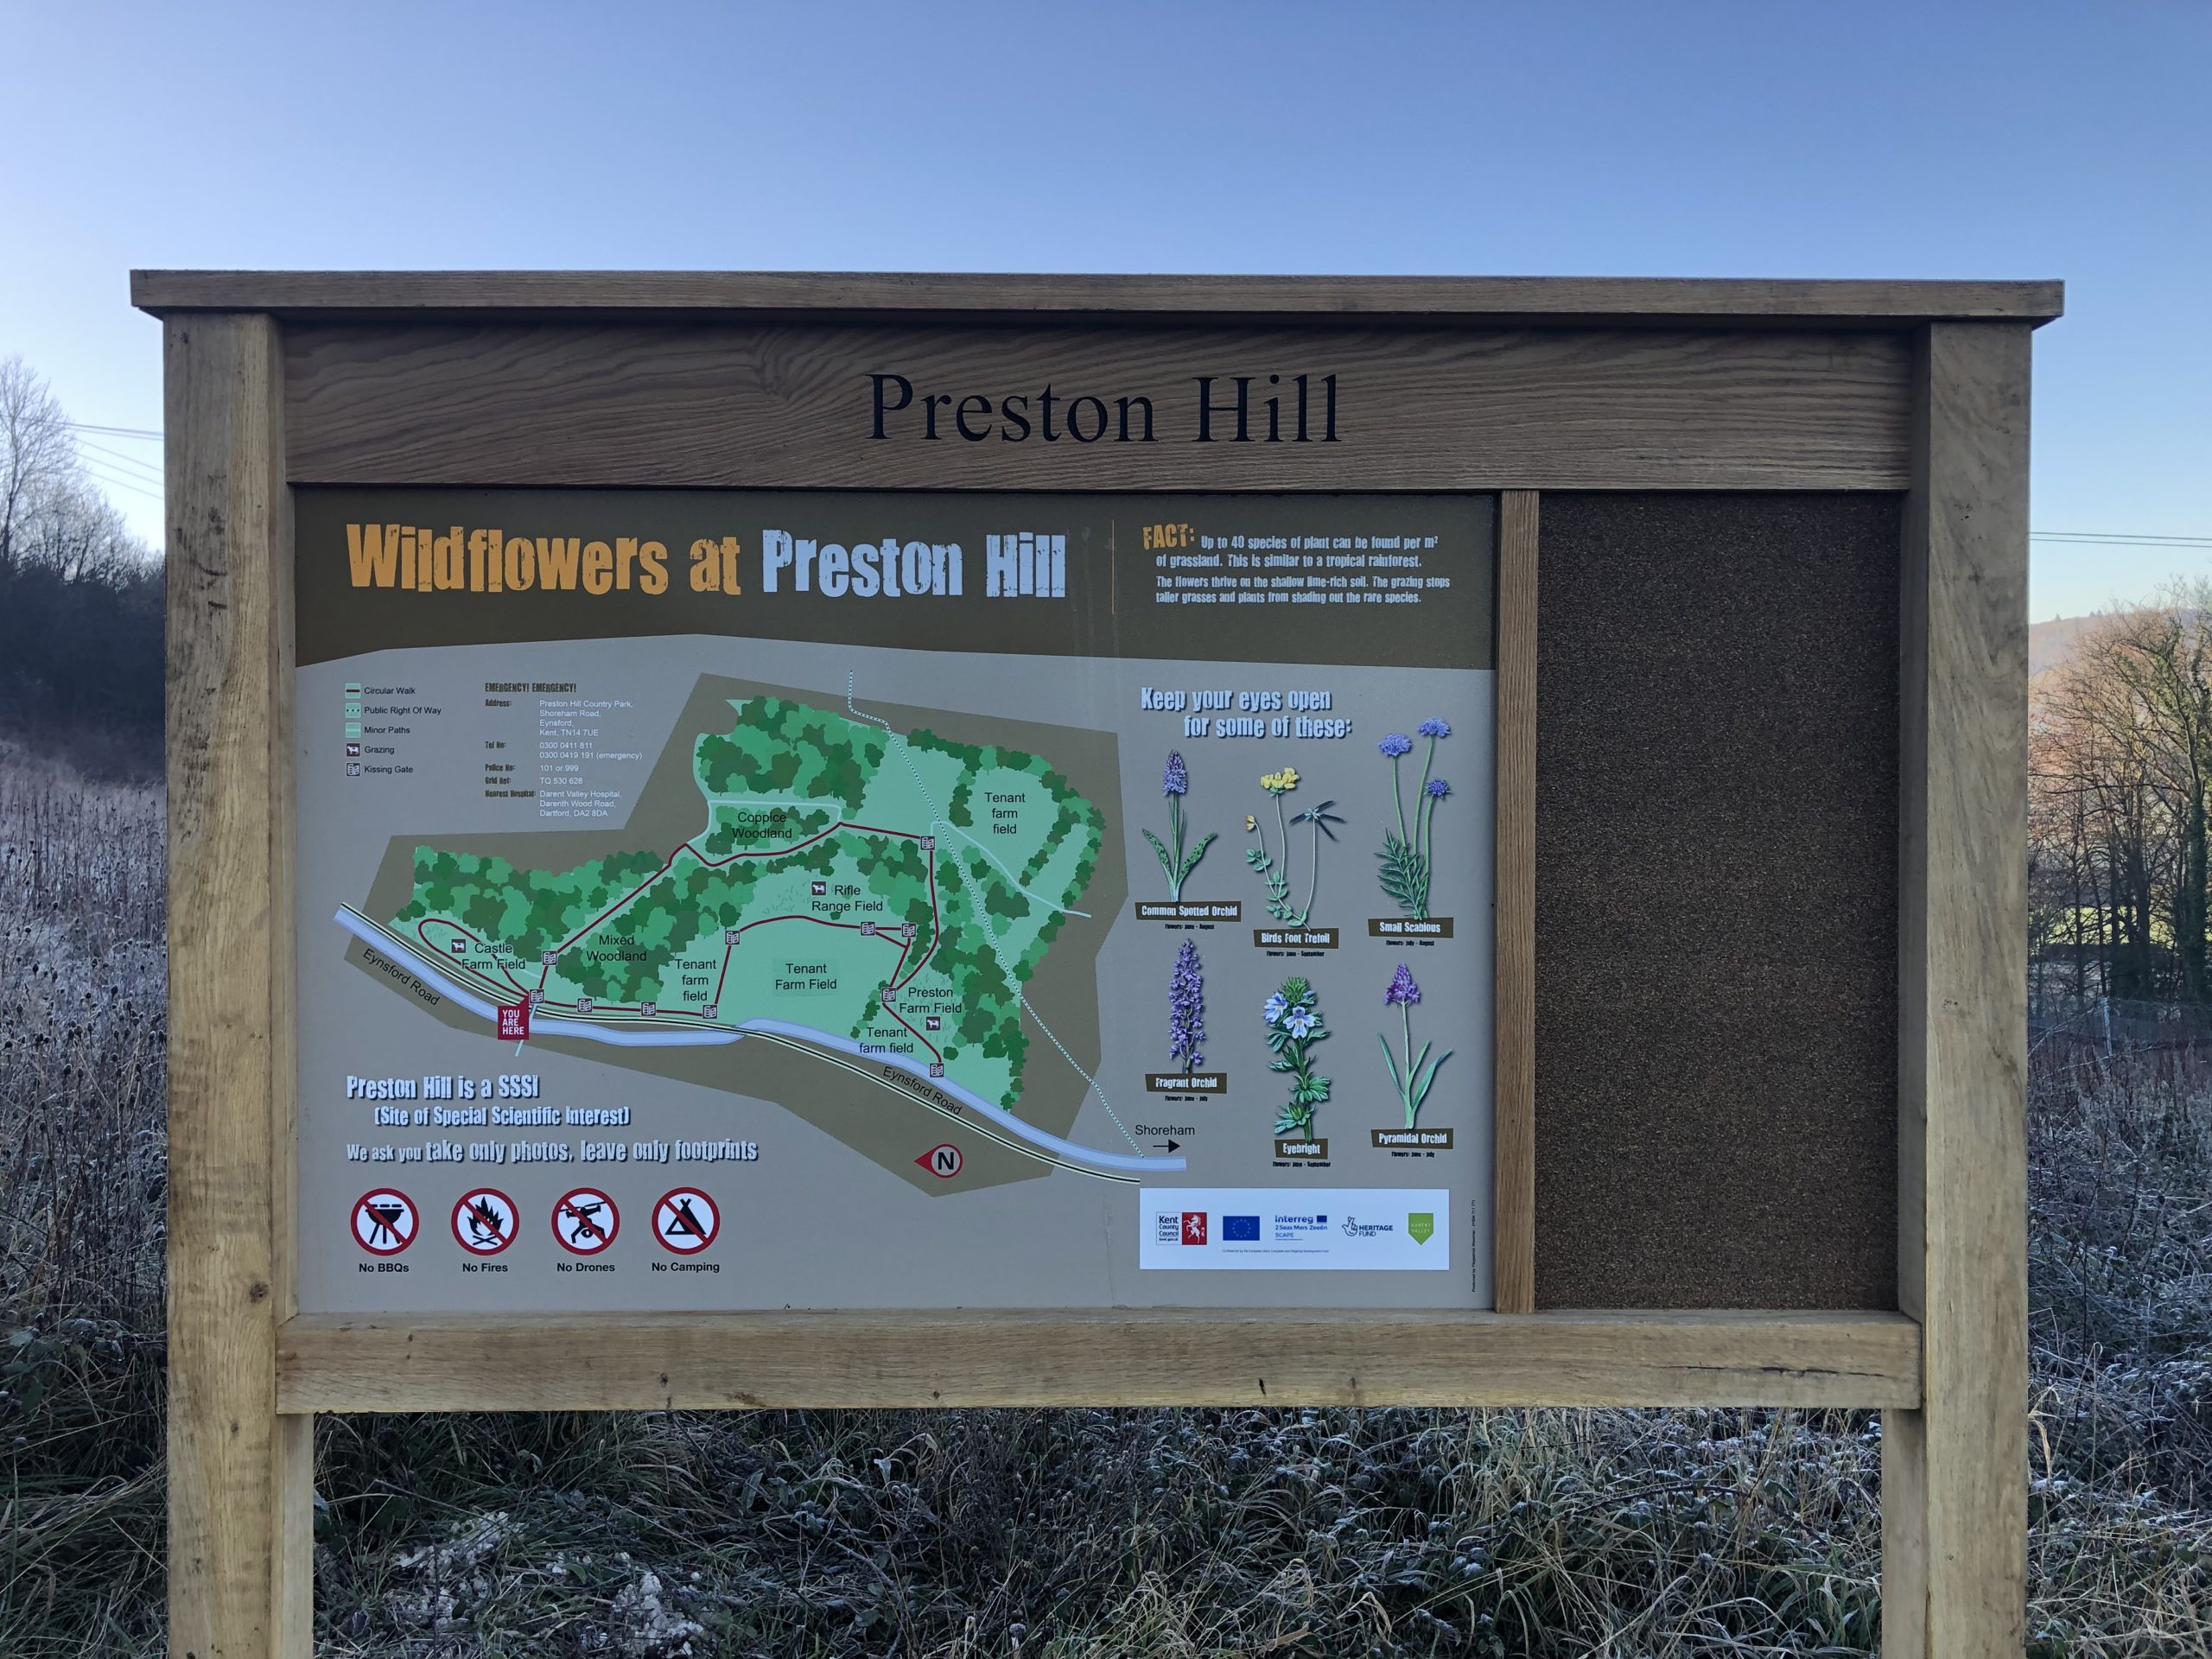 Information board about wildflowers at Preston Hill